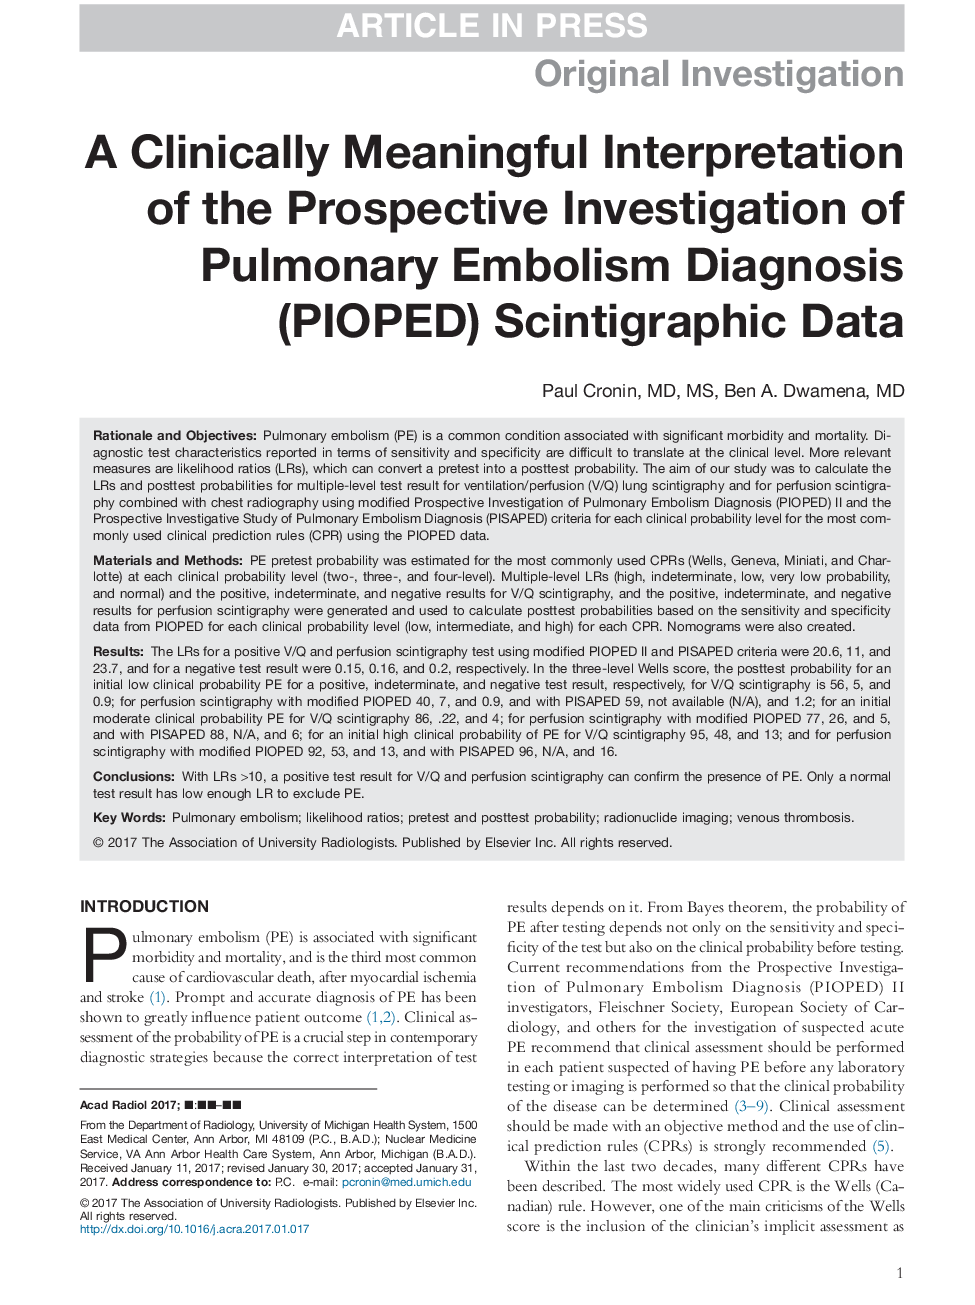 A Clinically Meaningful Interpretation of the Prospective Investigation of Pulmonary Embolism Diagnosis (PIOPED) Scintigraphic Data